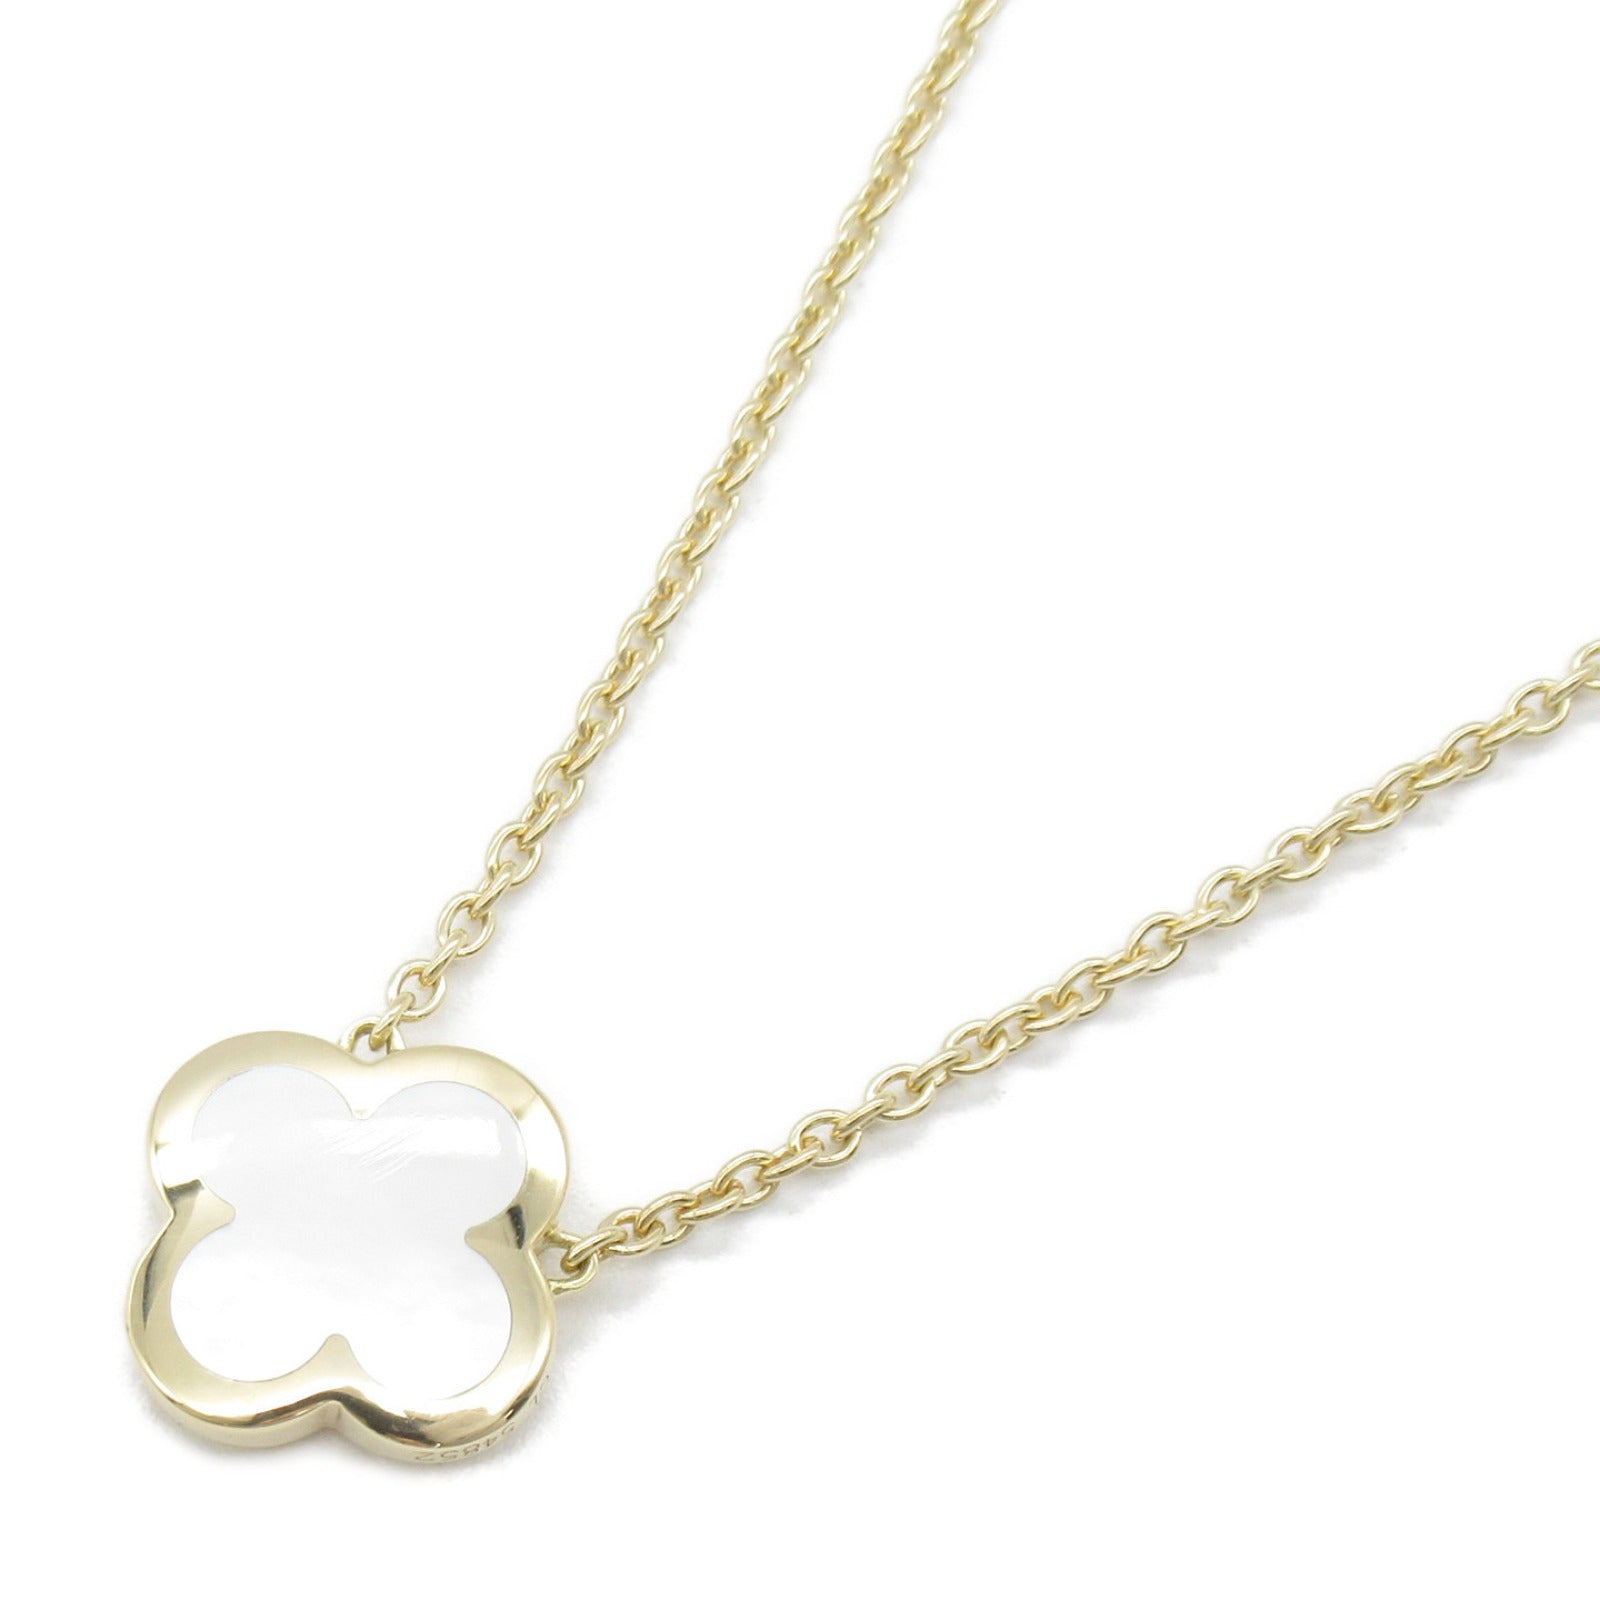 Van Cleef & Arpels Van Cleef & Arpels Alhambra White S Pendant Necklace Jewelry K18 (yellow g) White Shell  White Shell